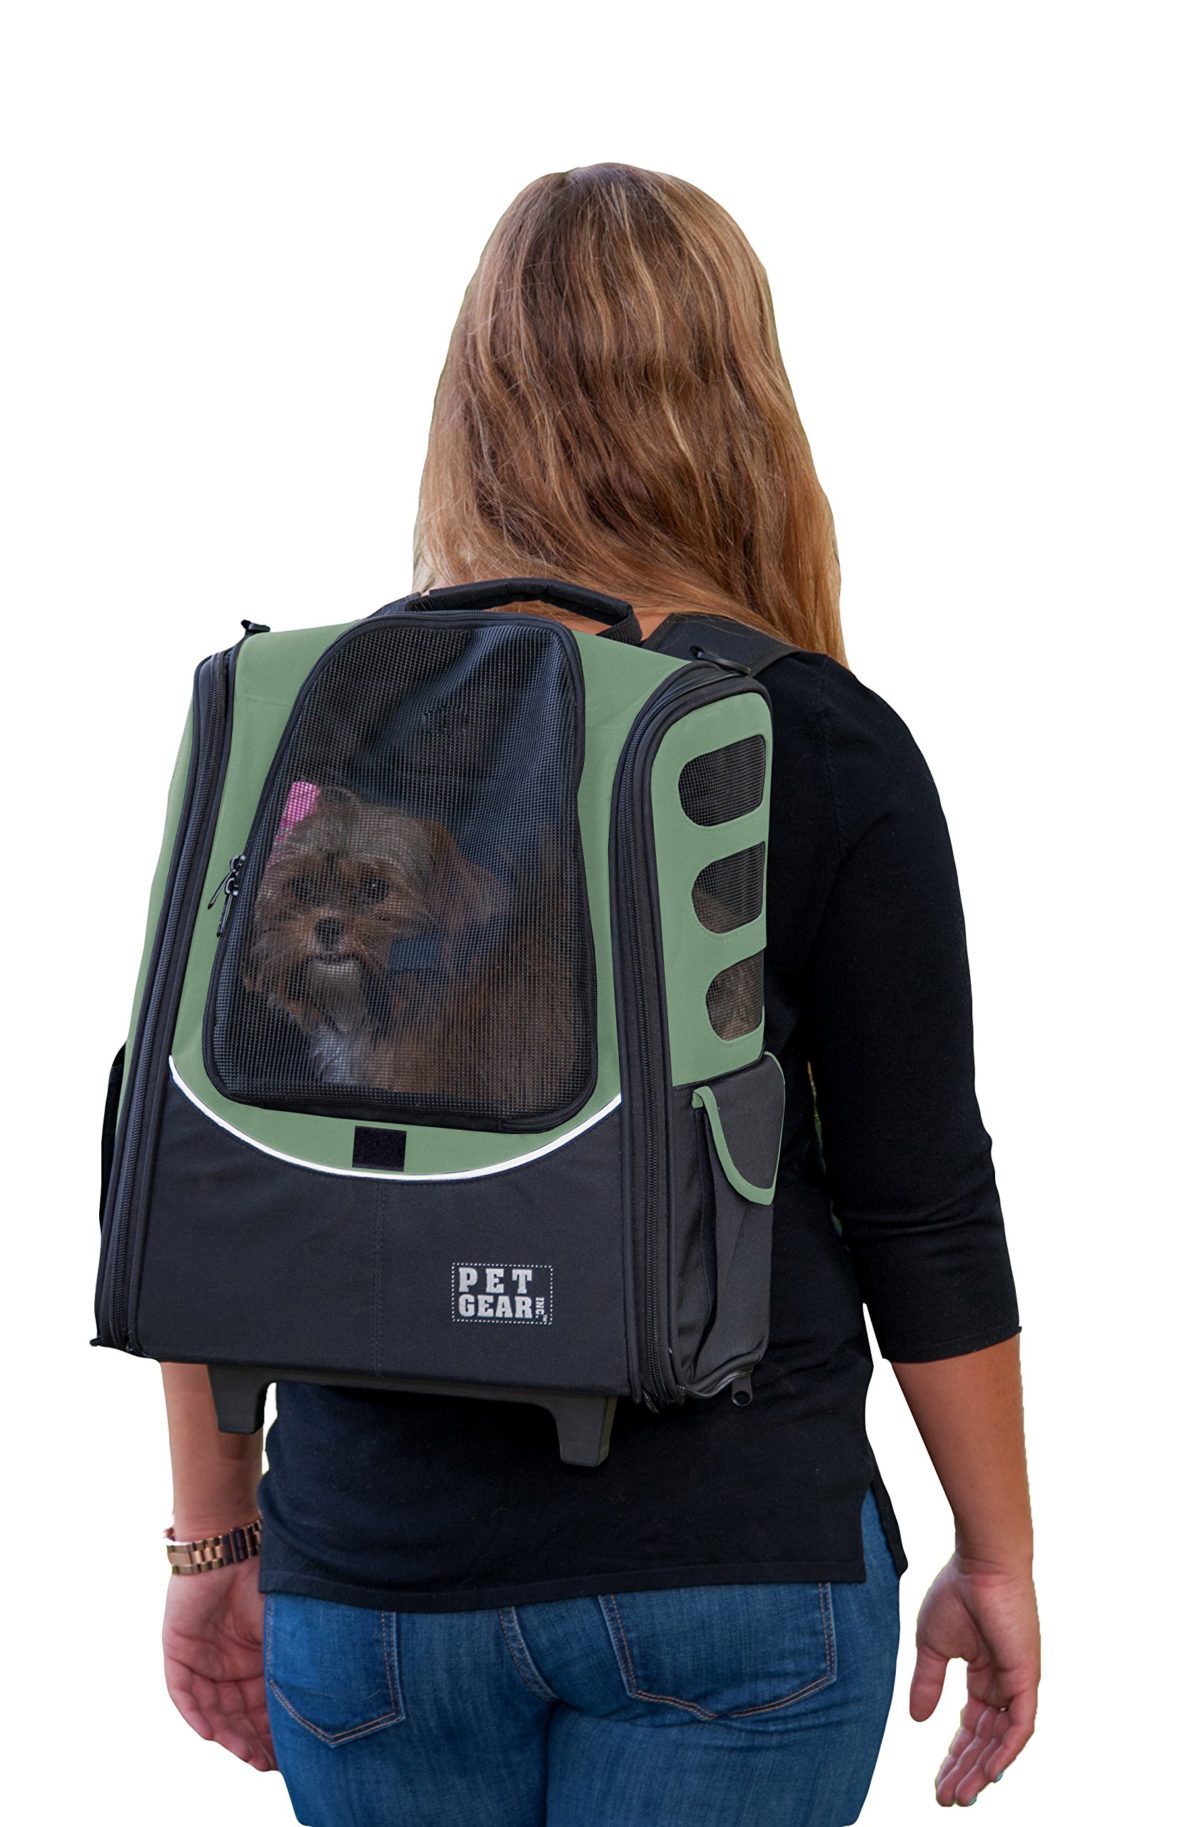 Travel Carrier, Car Seat for Cats/Dogs